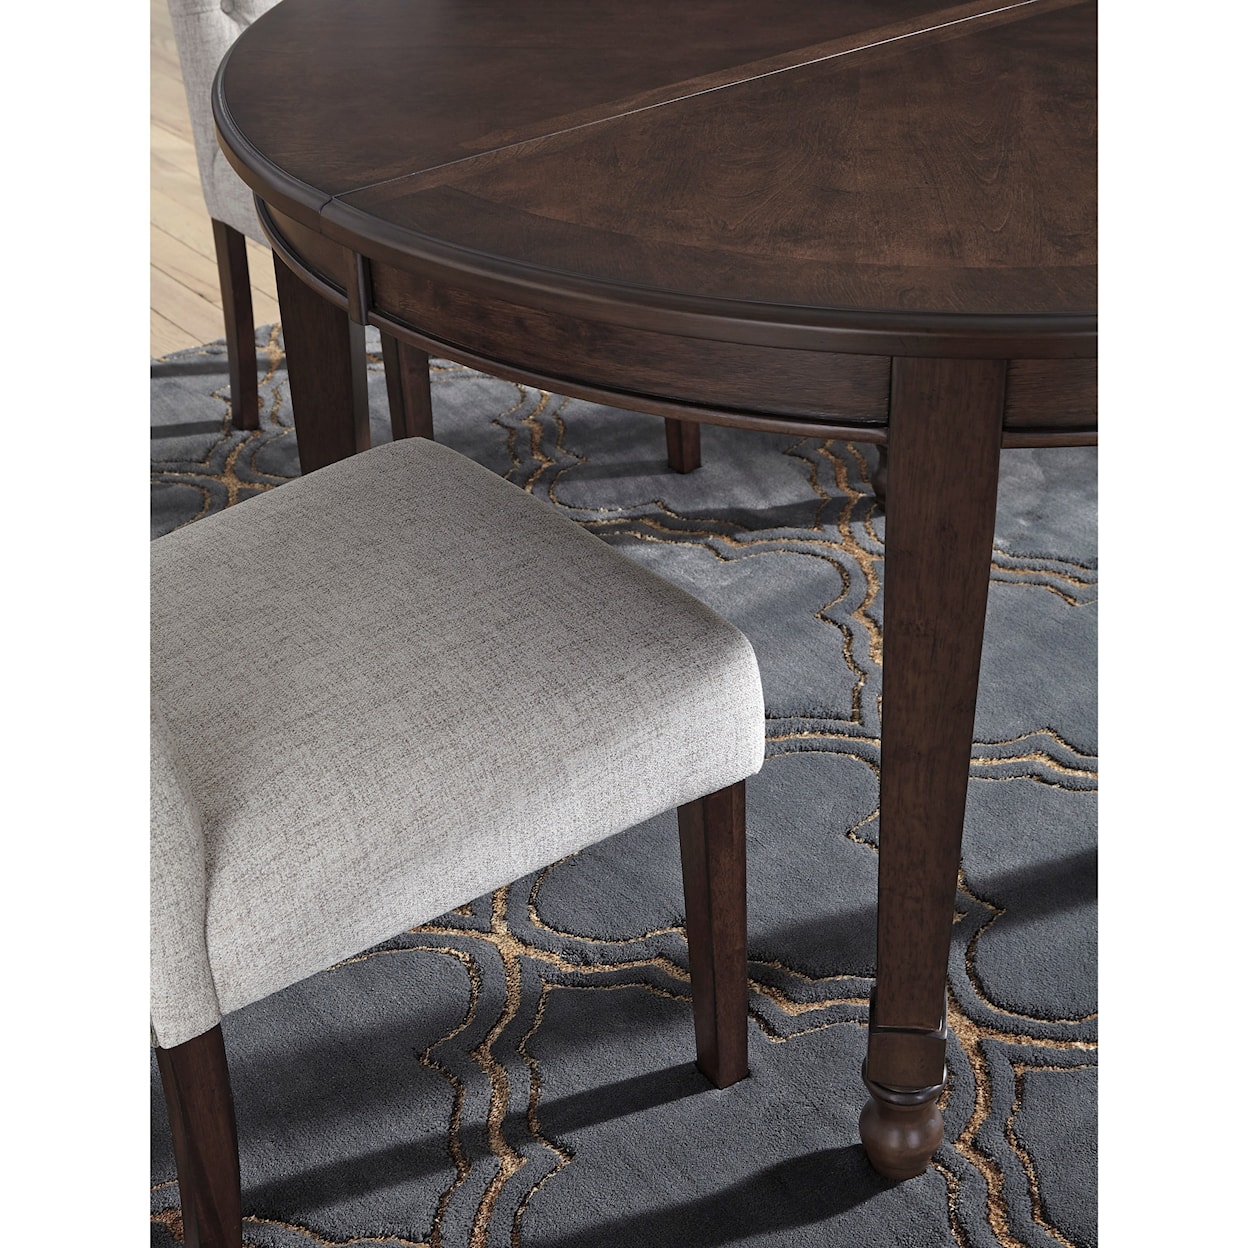 Signature Design by Ashley Adinton Oval Dining Room Extension Table